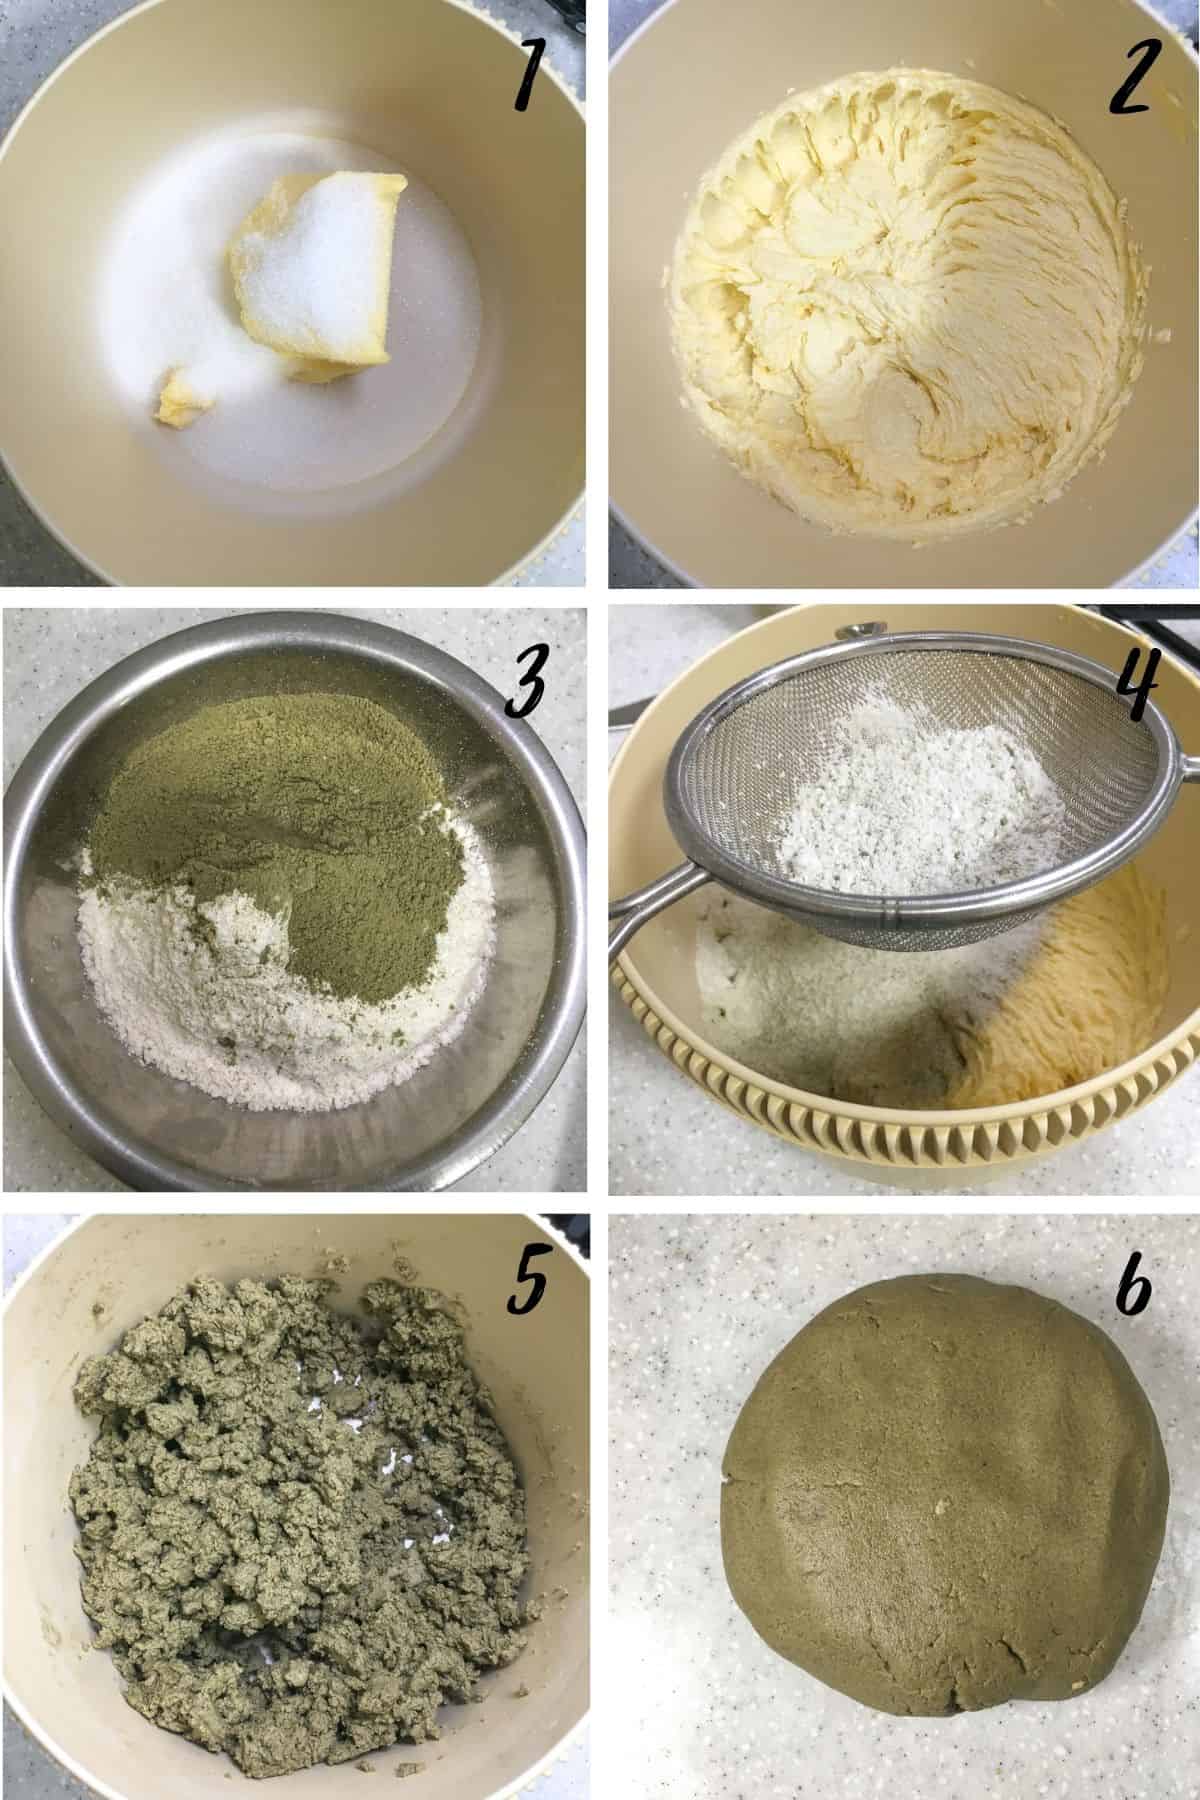 A poster of 6 images showing how to make cookies with matcha powder